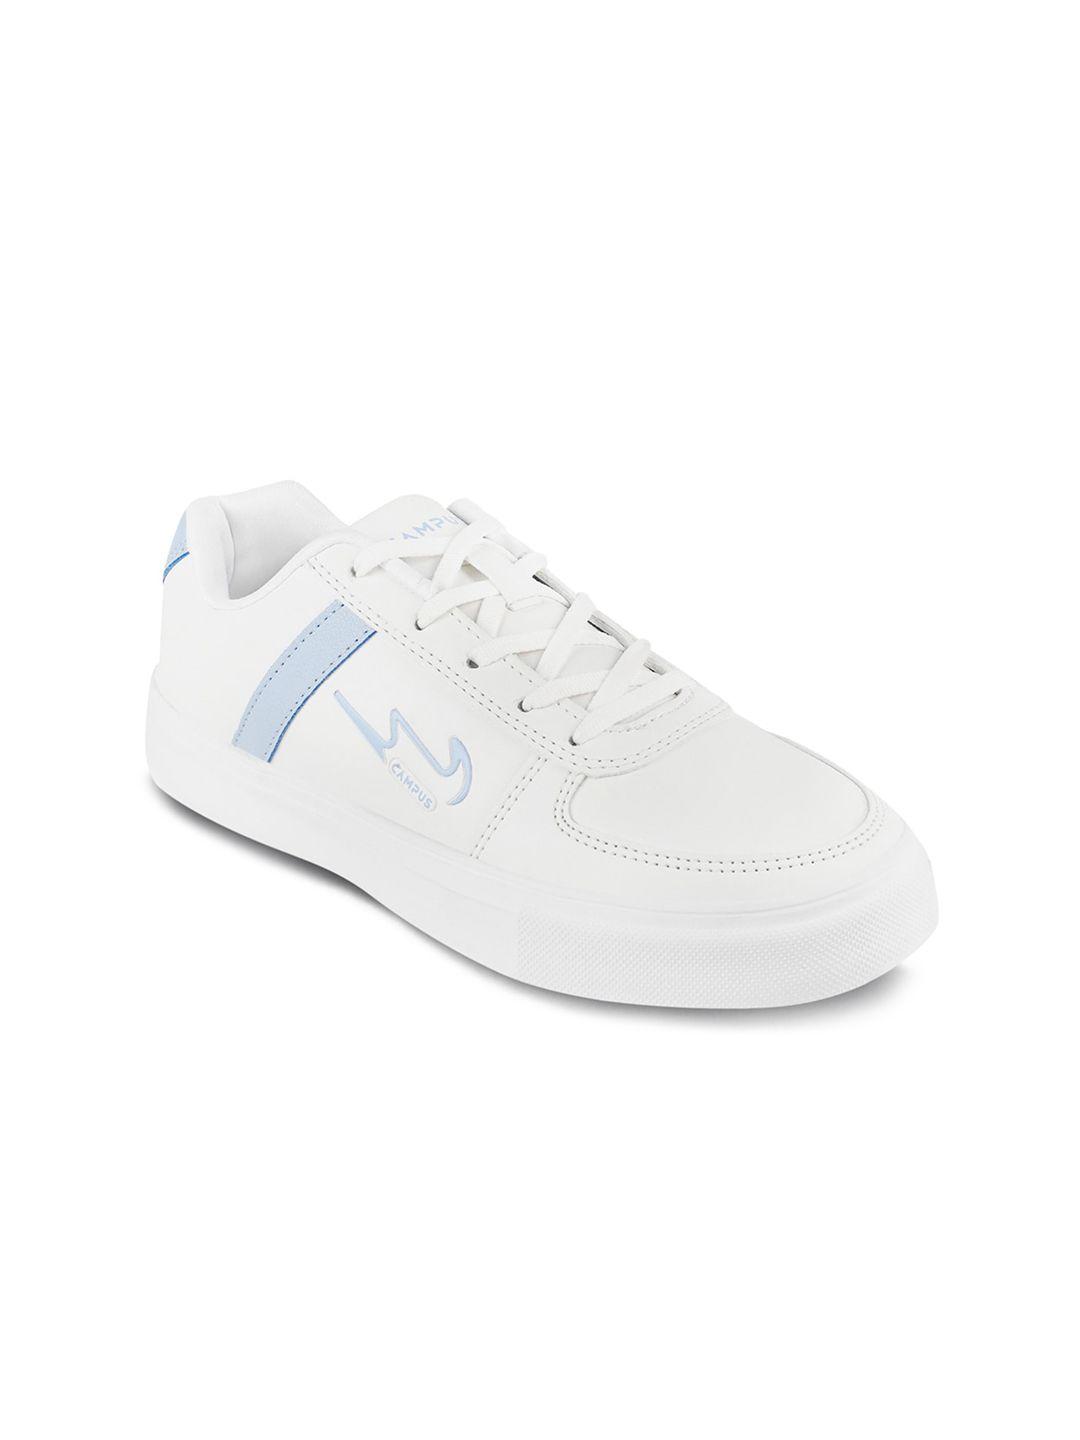 campus-women-textured-padded-basics-sneakers